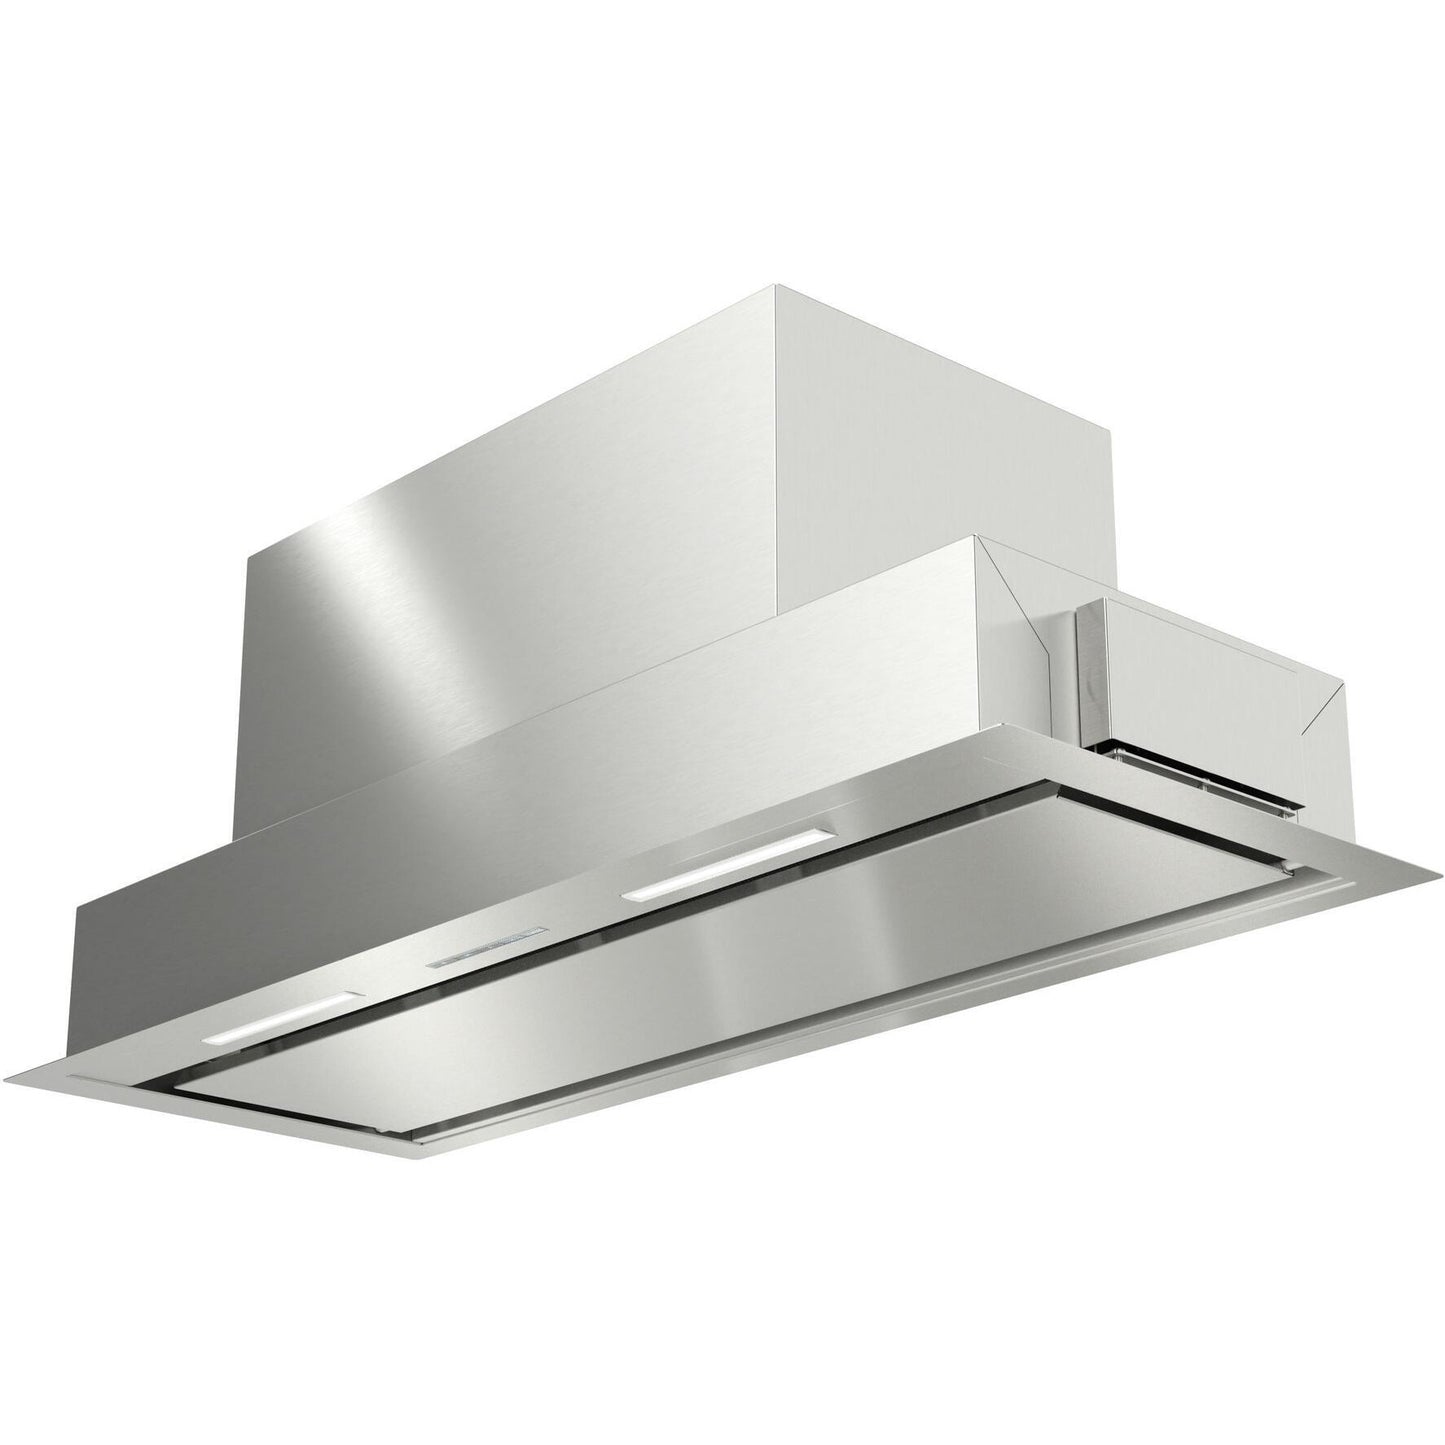 Forte Maya 30" 1100 CFM Convertible Residential Round Duct Stainless Steel Cabinet Insert Range Hood With LED Bar Lighting